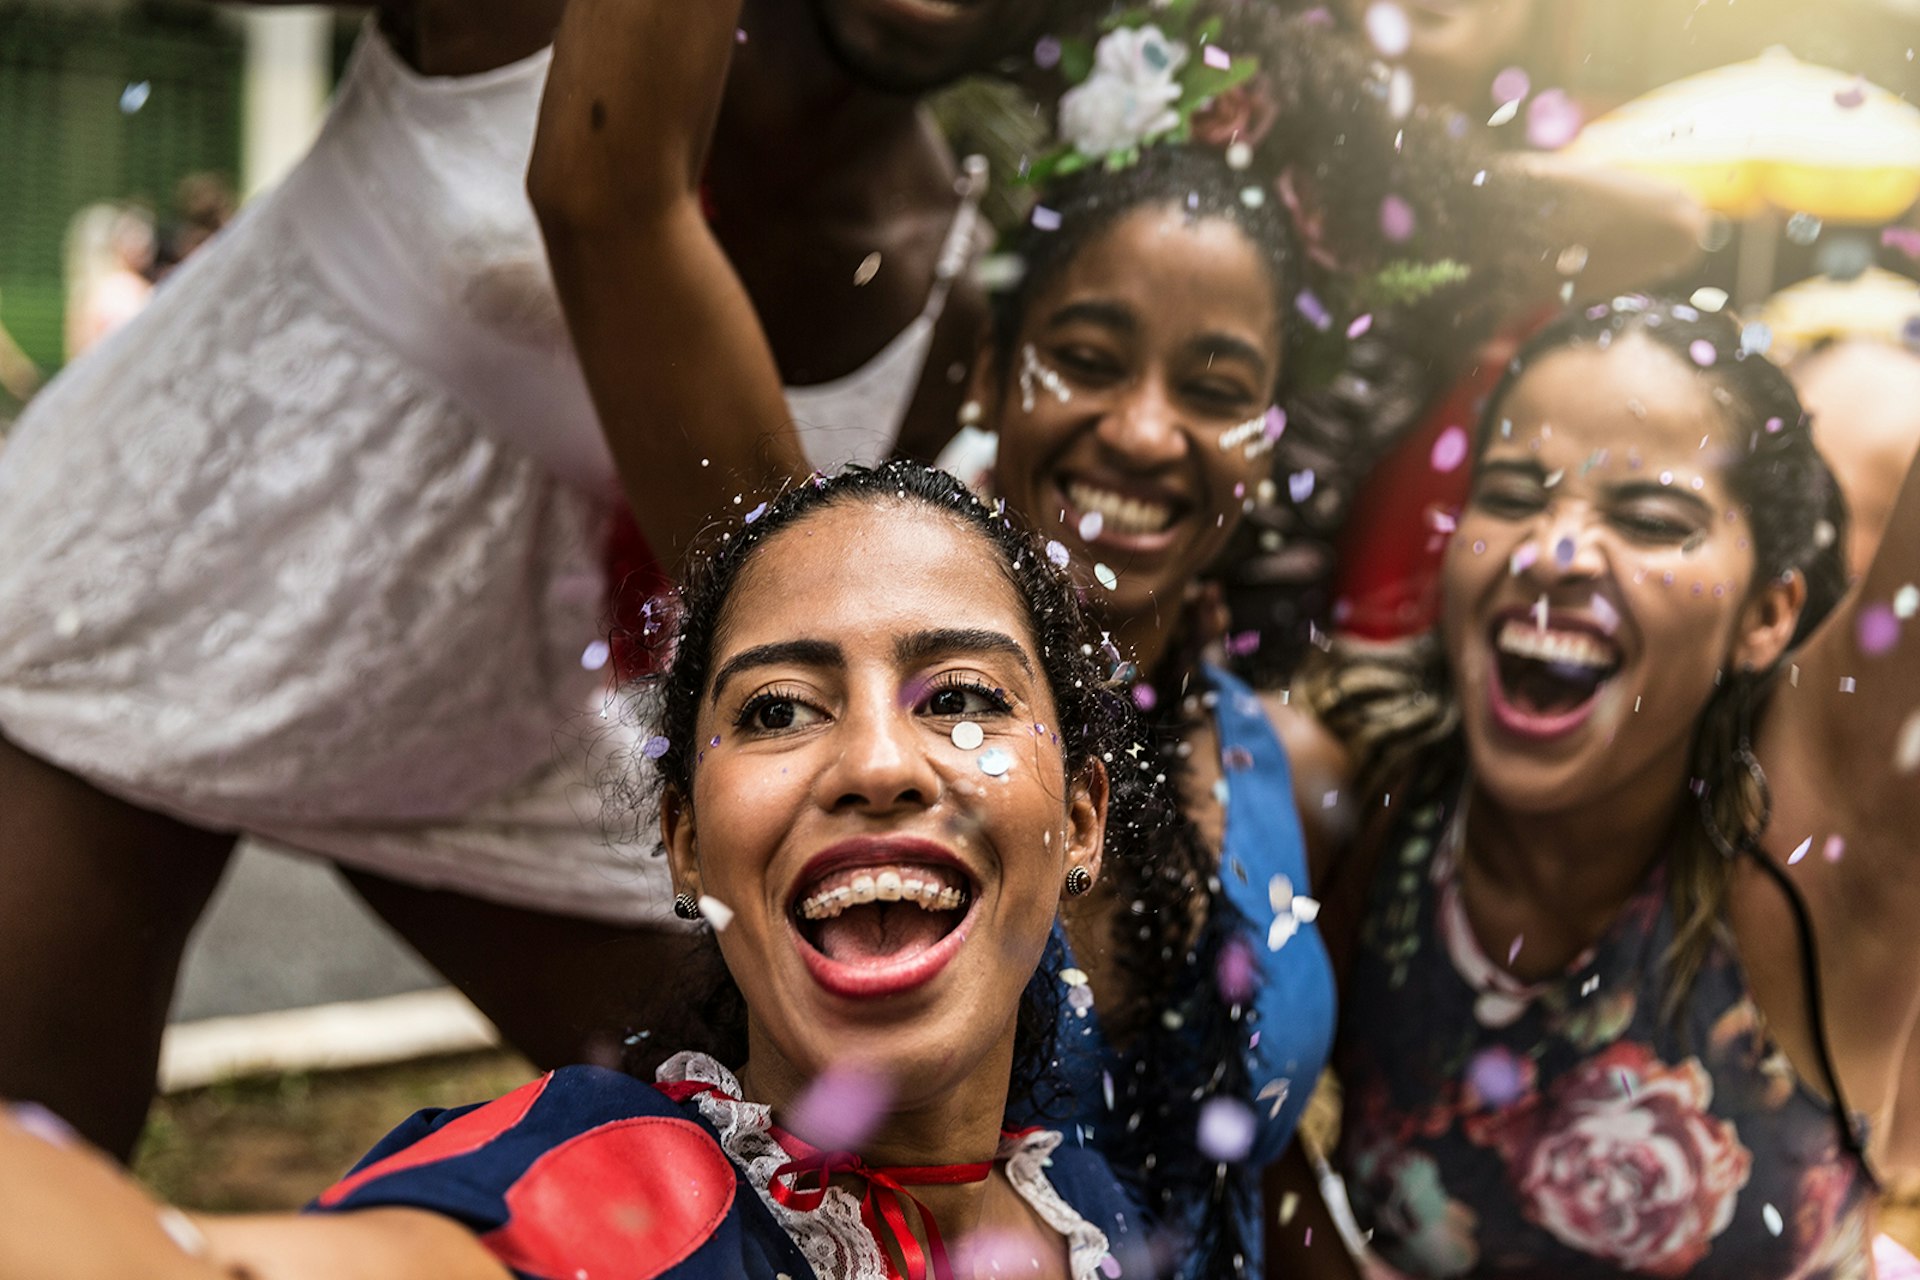 Four young women smile and cheer as confetti falls on them